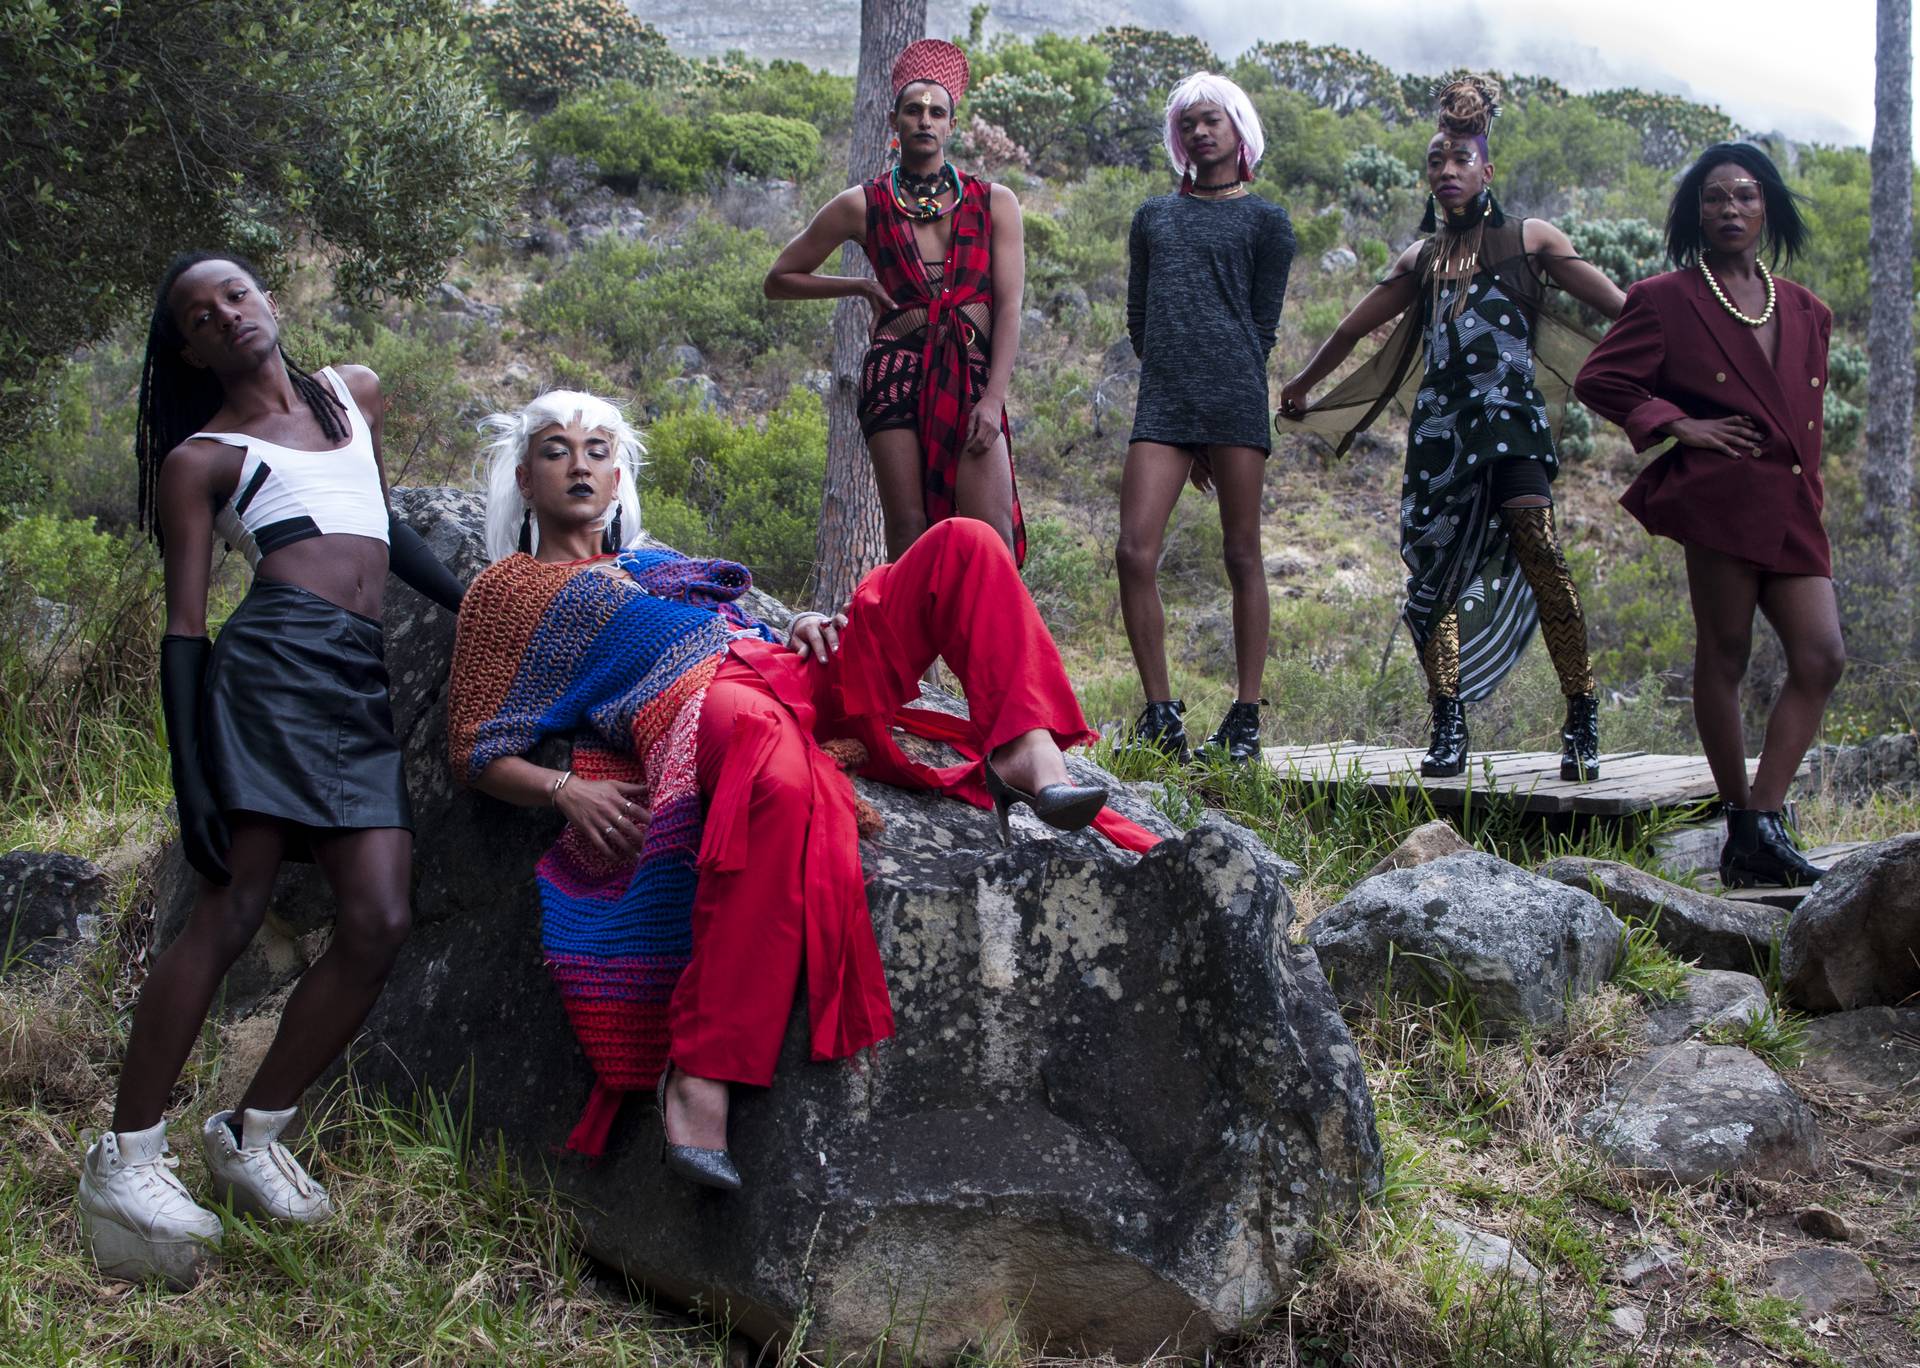 Fashion maven Gavin Mikey Collins co-ordinated and directed the shoot that saw the likes of Umlilo, Kieron Jina, Sandiso Ngubane, Githan Coopoo, Vuyisani Bisholo, Quaid “Queezy” Heneke and Joshua Allen disrupt the heteronormative and colonial gaze with their unwavering celebration of femininity.